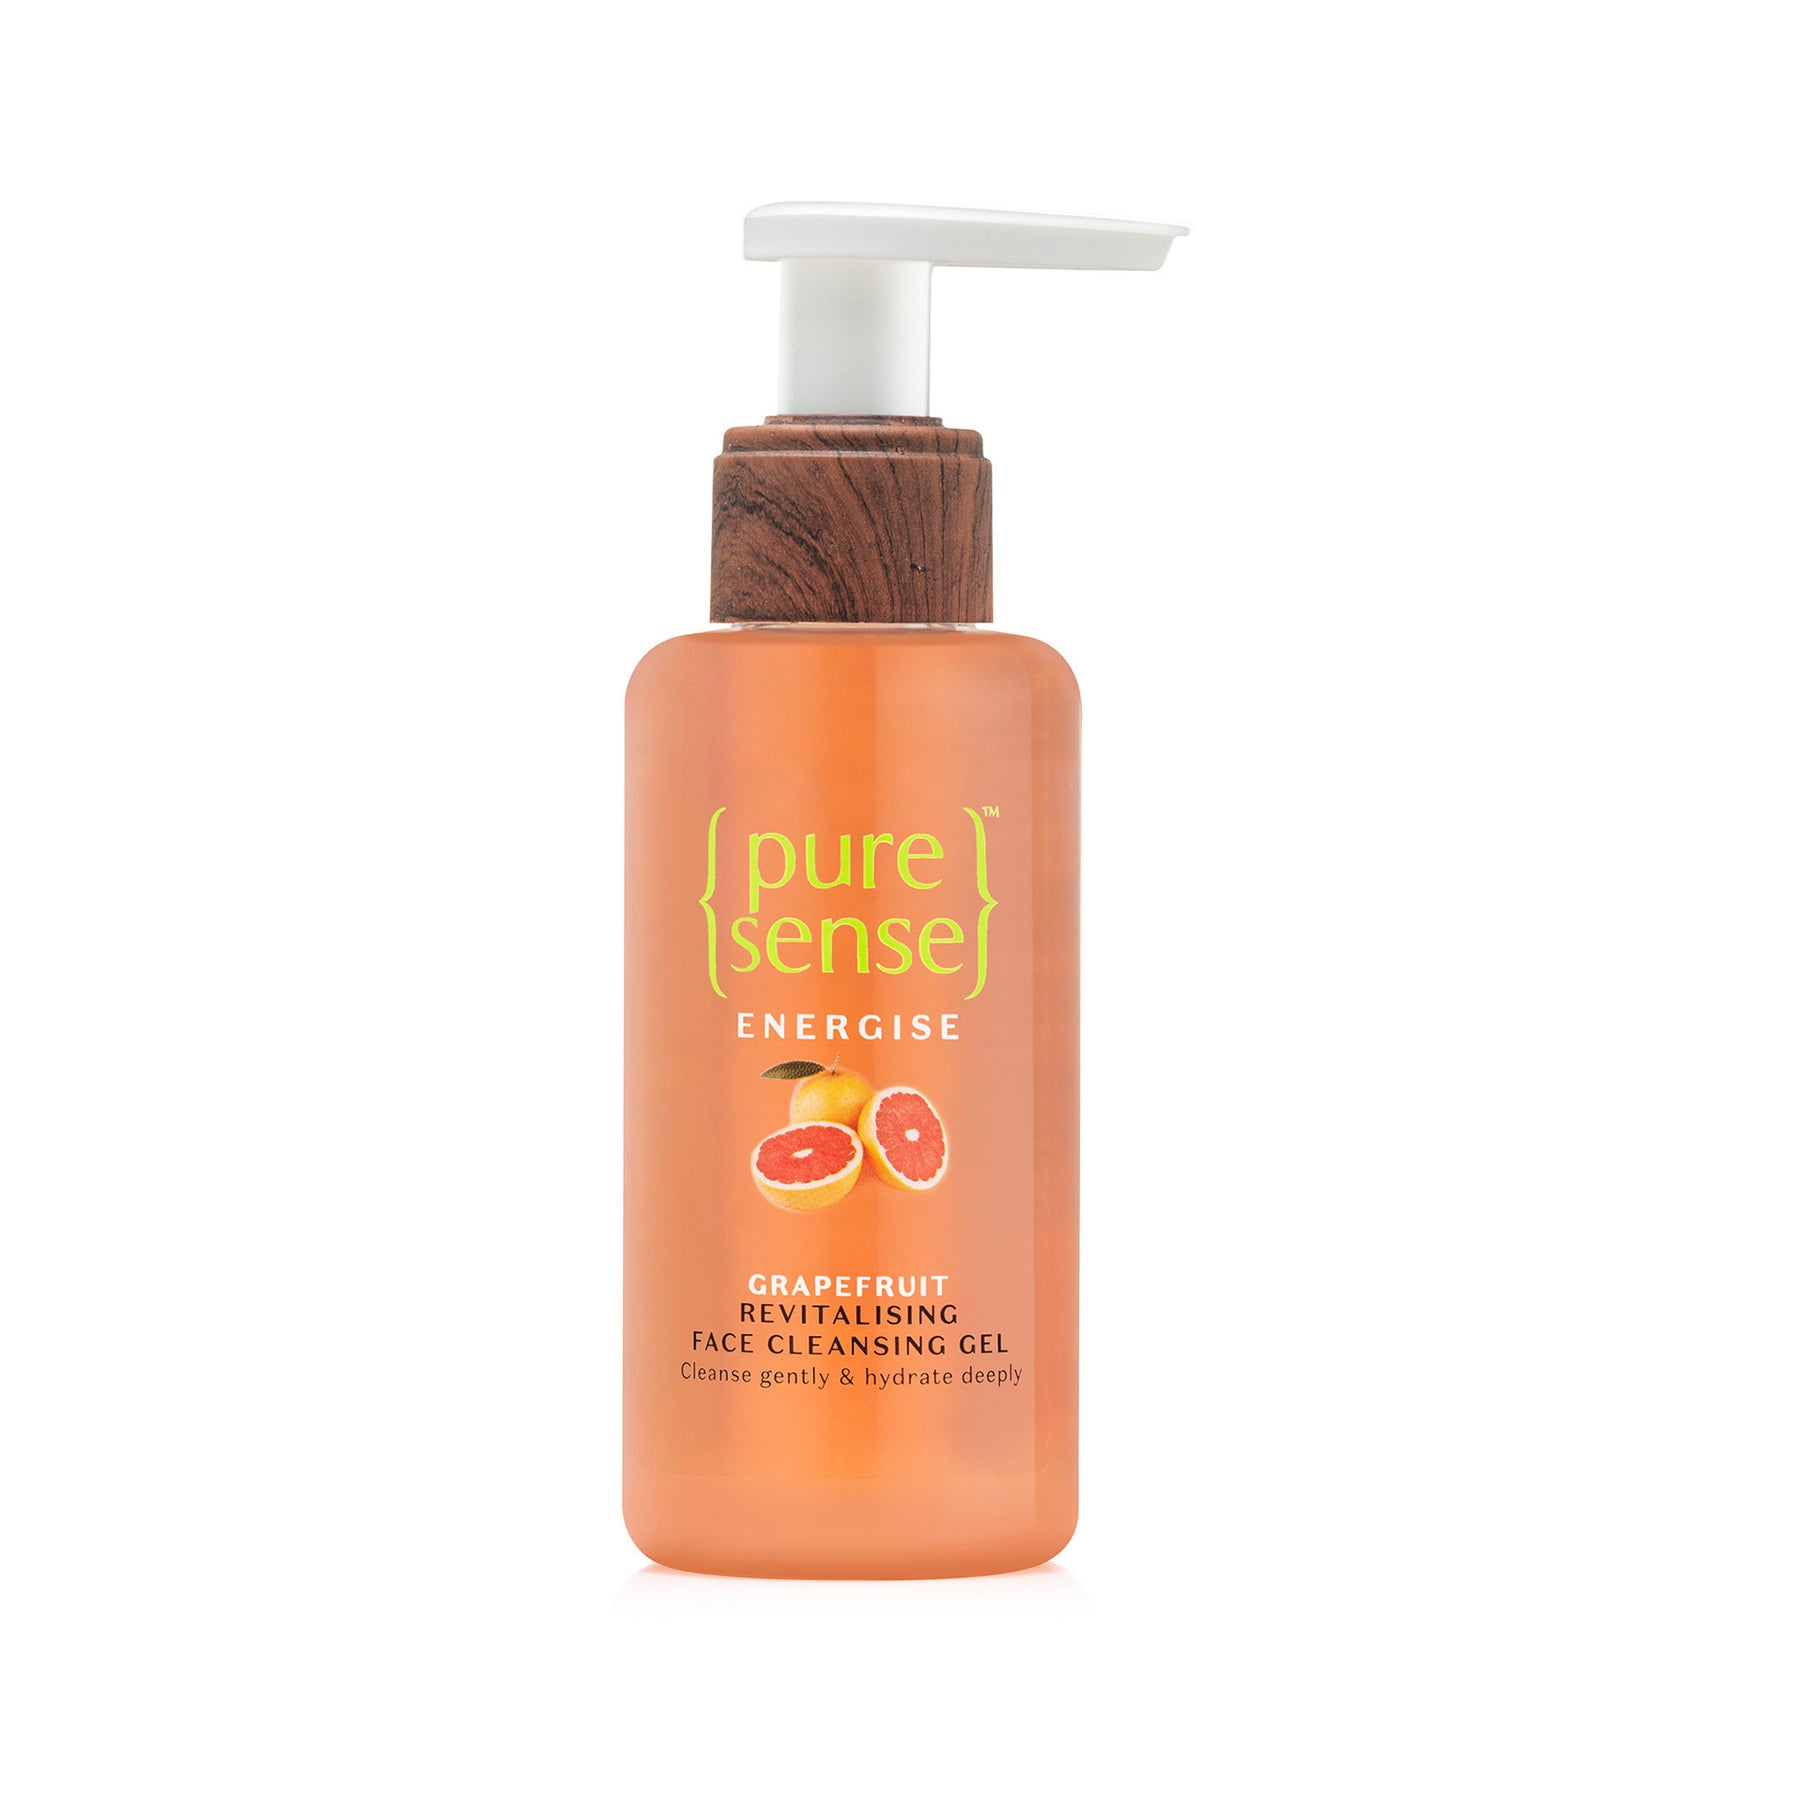 Energise Grapefruit Revitalising Face Cleansing Gel (Face Wash) | From the makers of Parachute Advansed | 100ml - PureSense